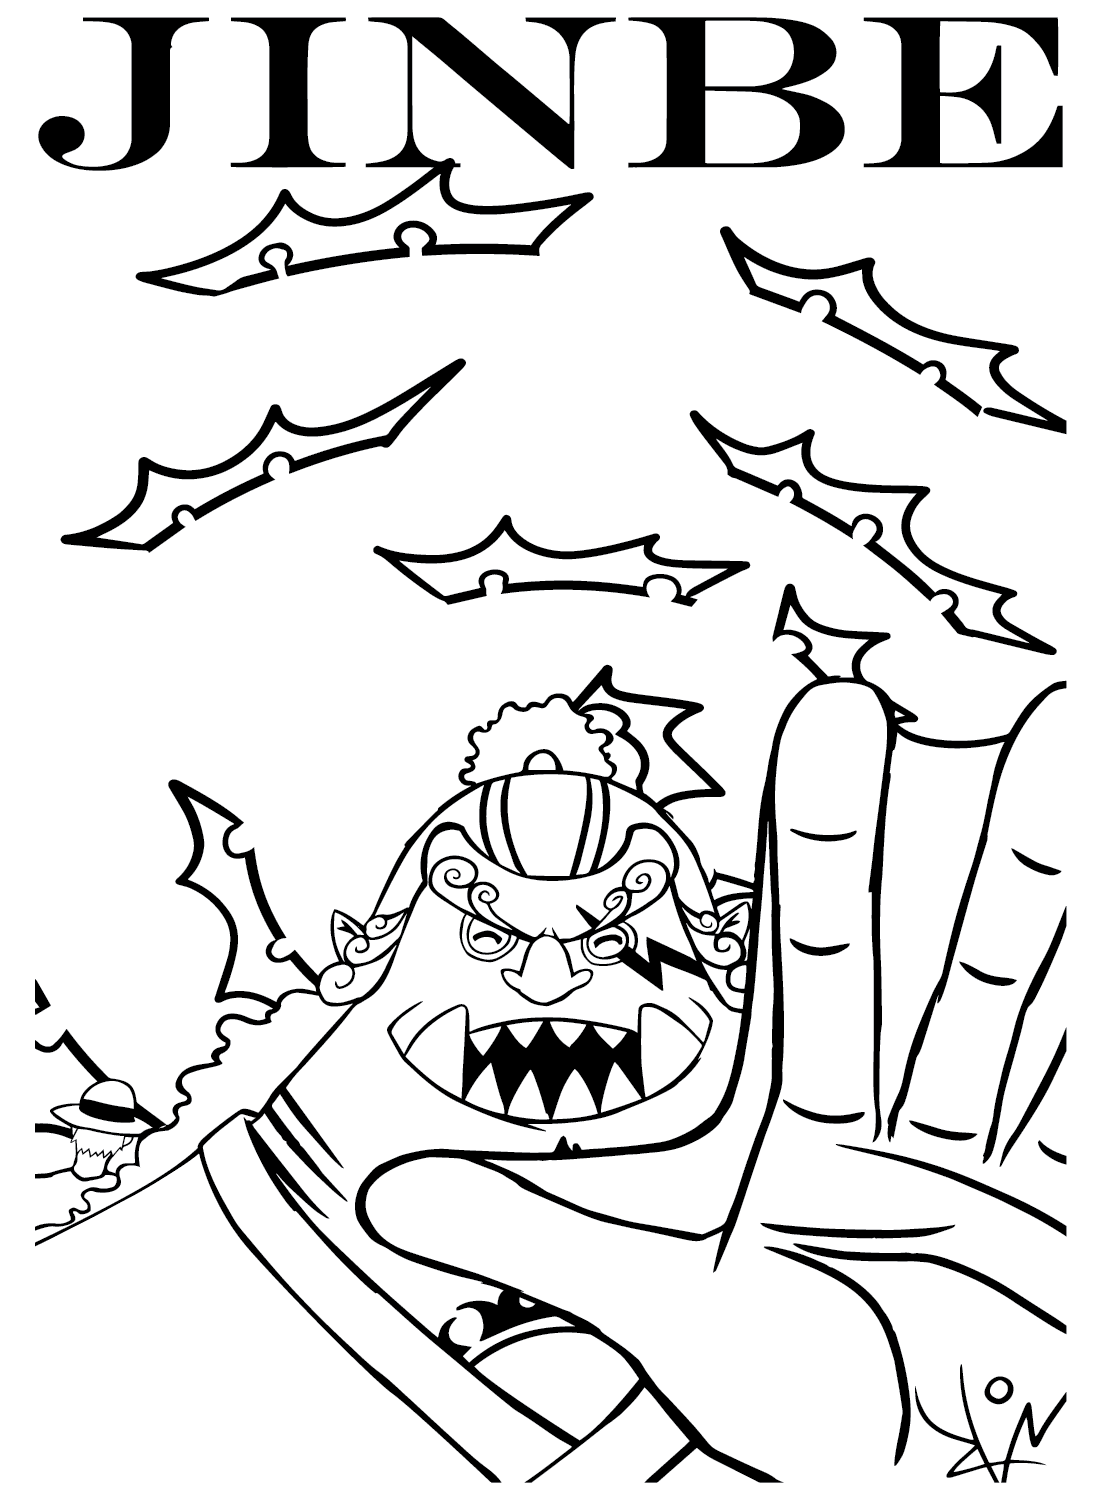 Drawing Jinbe Coloring Page from Jinbe